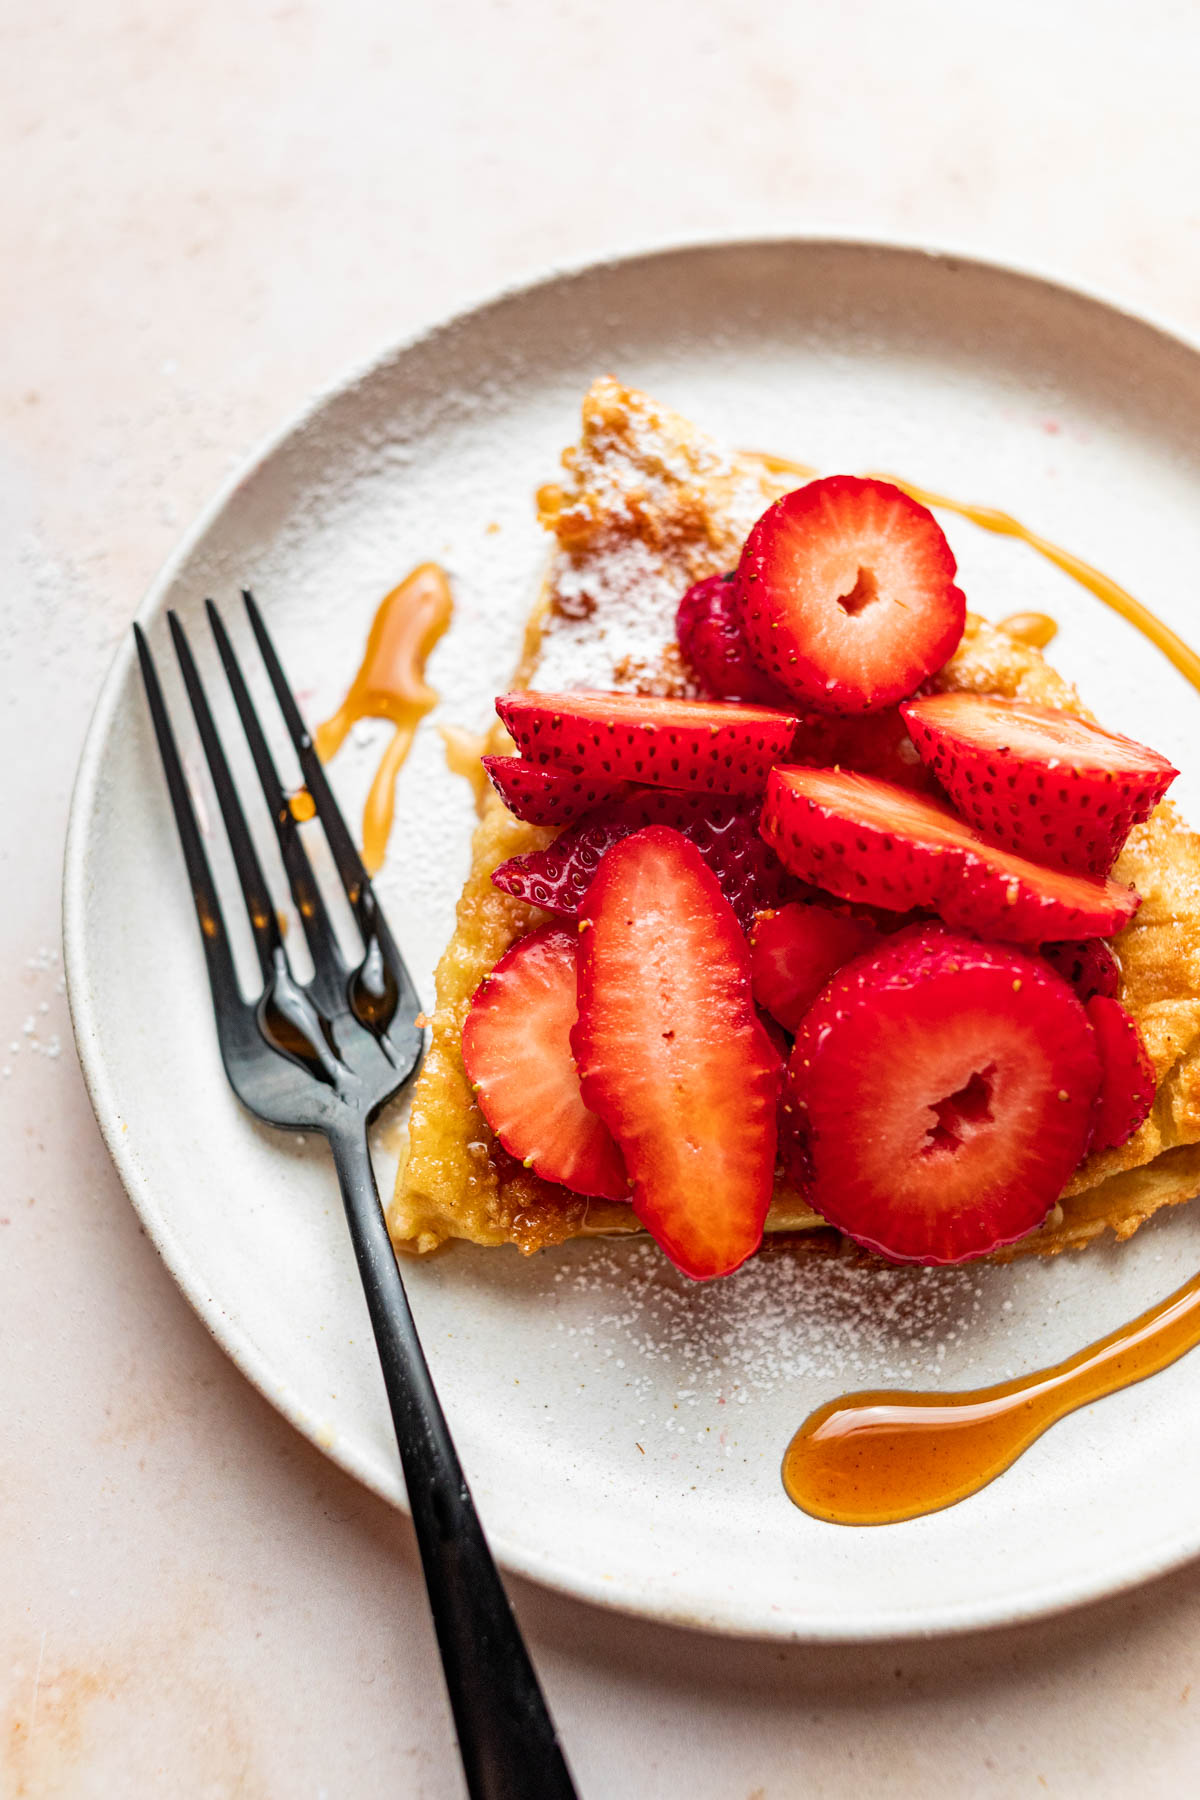 A slice of gluten-free Dutch Baby on a plate topped with strawberries, maple syrup, and powdered sugar.